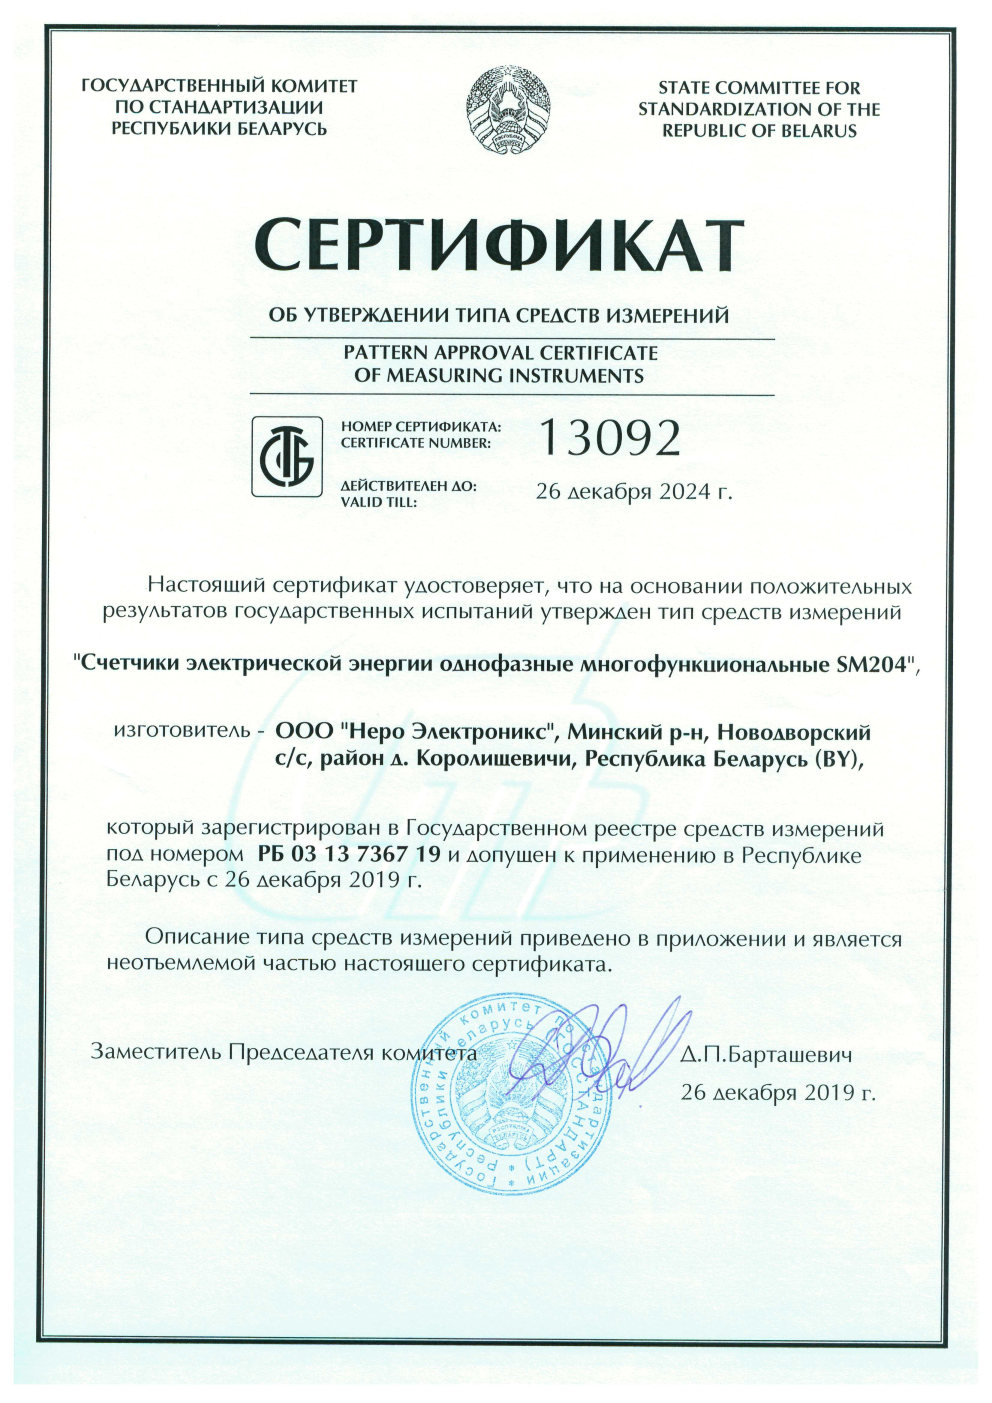 Certificate of compliance for type of measuring instruments for Single-Phase Multifunctional Electric Meters SM204